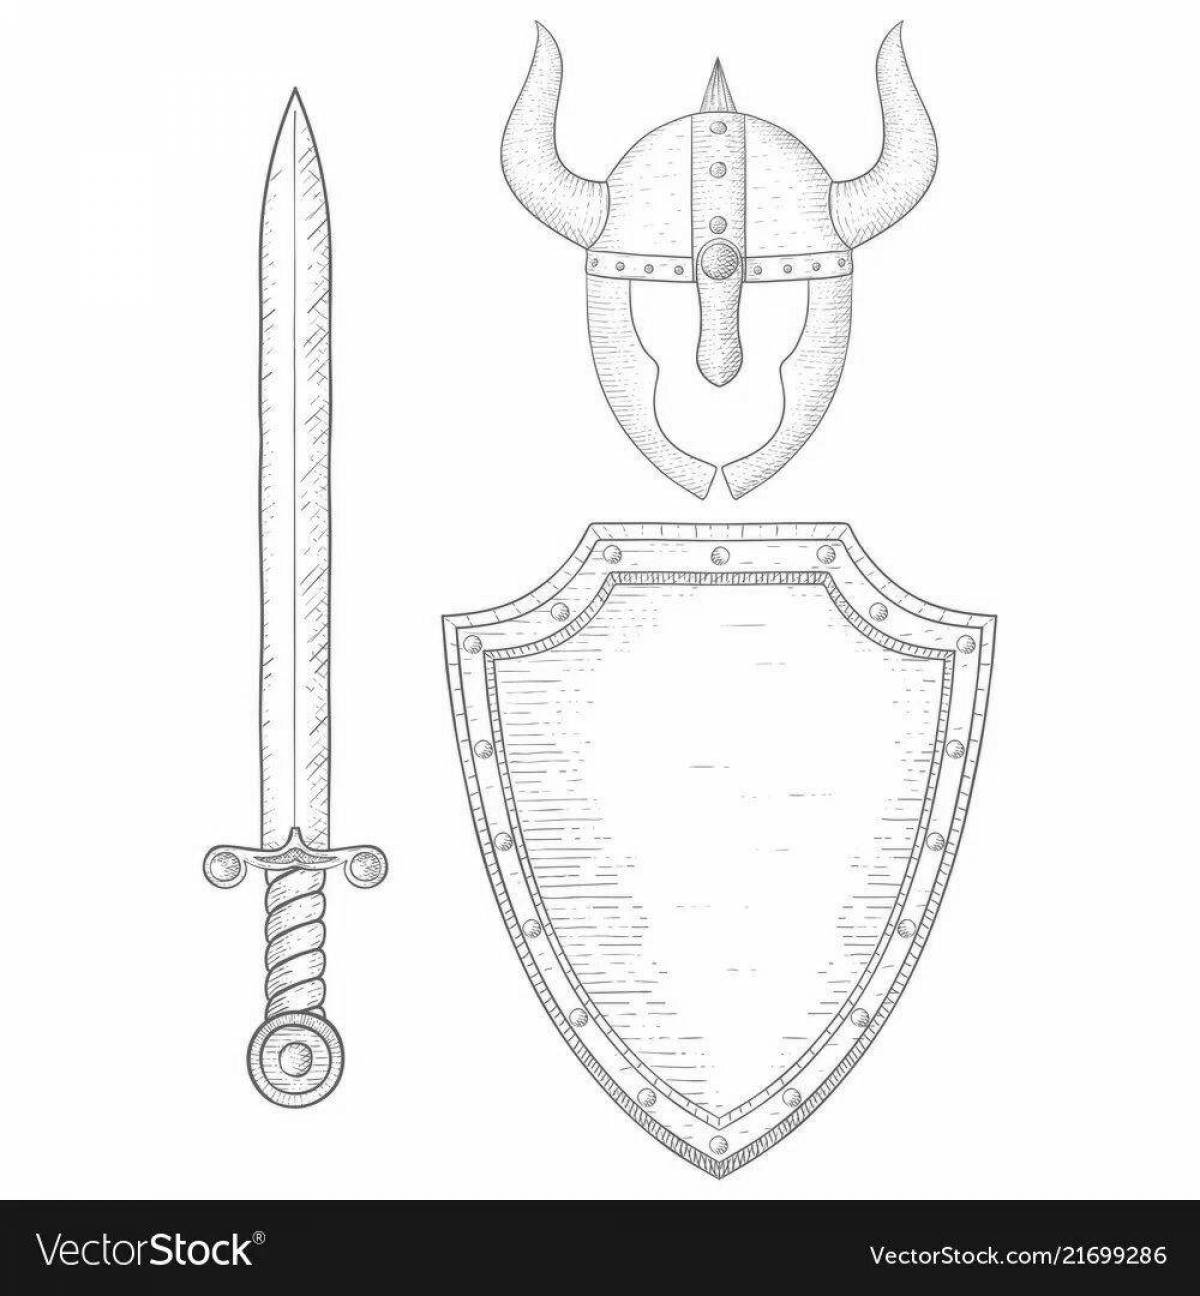 Fun hero's shield coloring page for kids